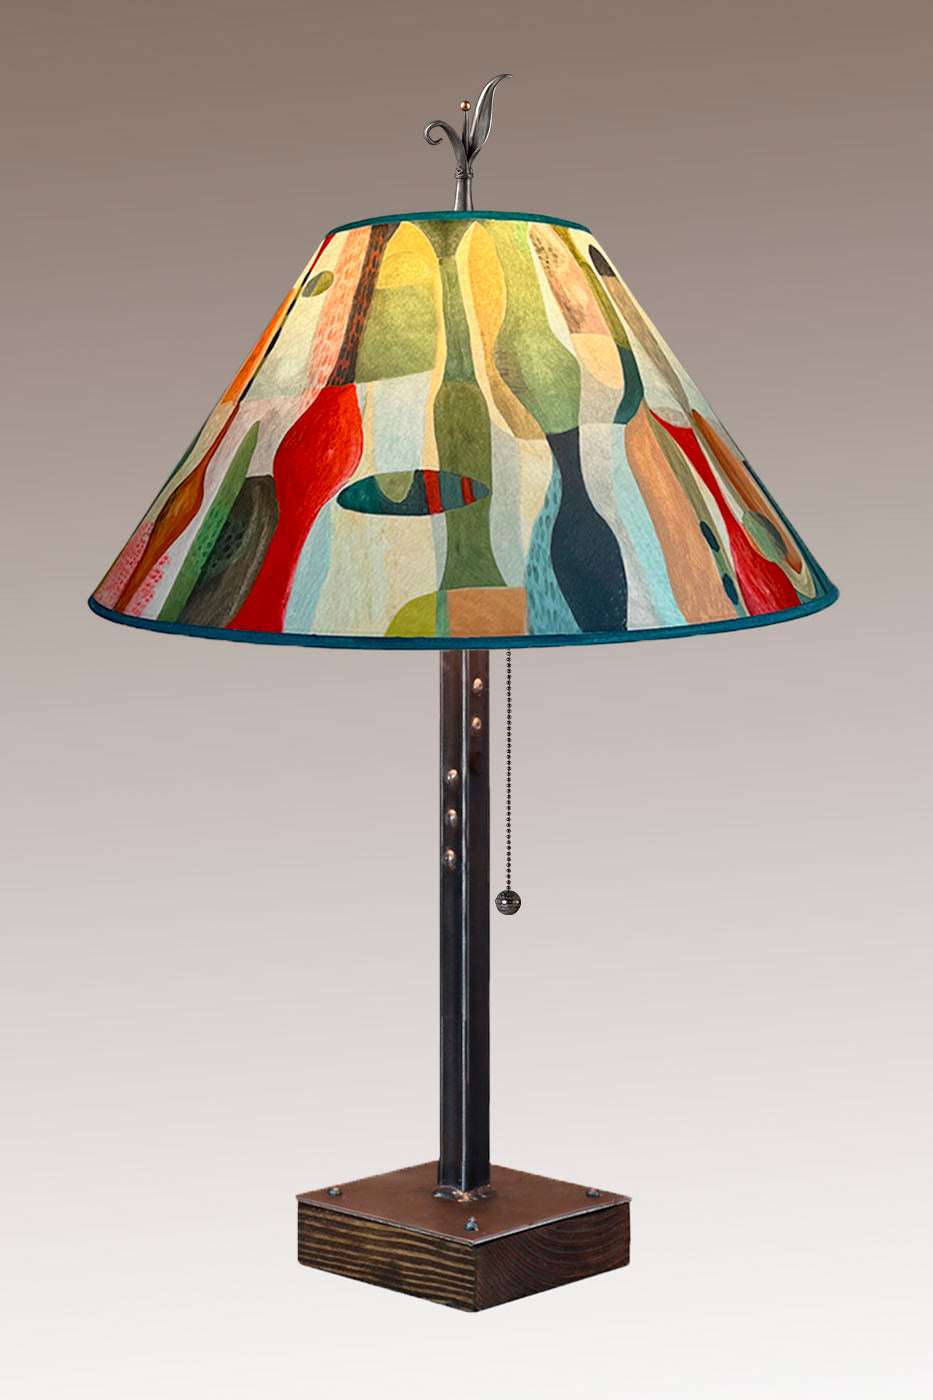 Janna Ugone & Co Table Lamp Steel Table Lamp on Wood with Large Conical Shade in Riviera in Poppy